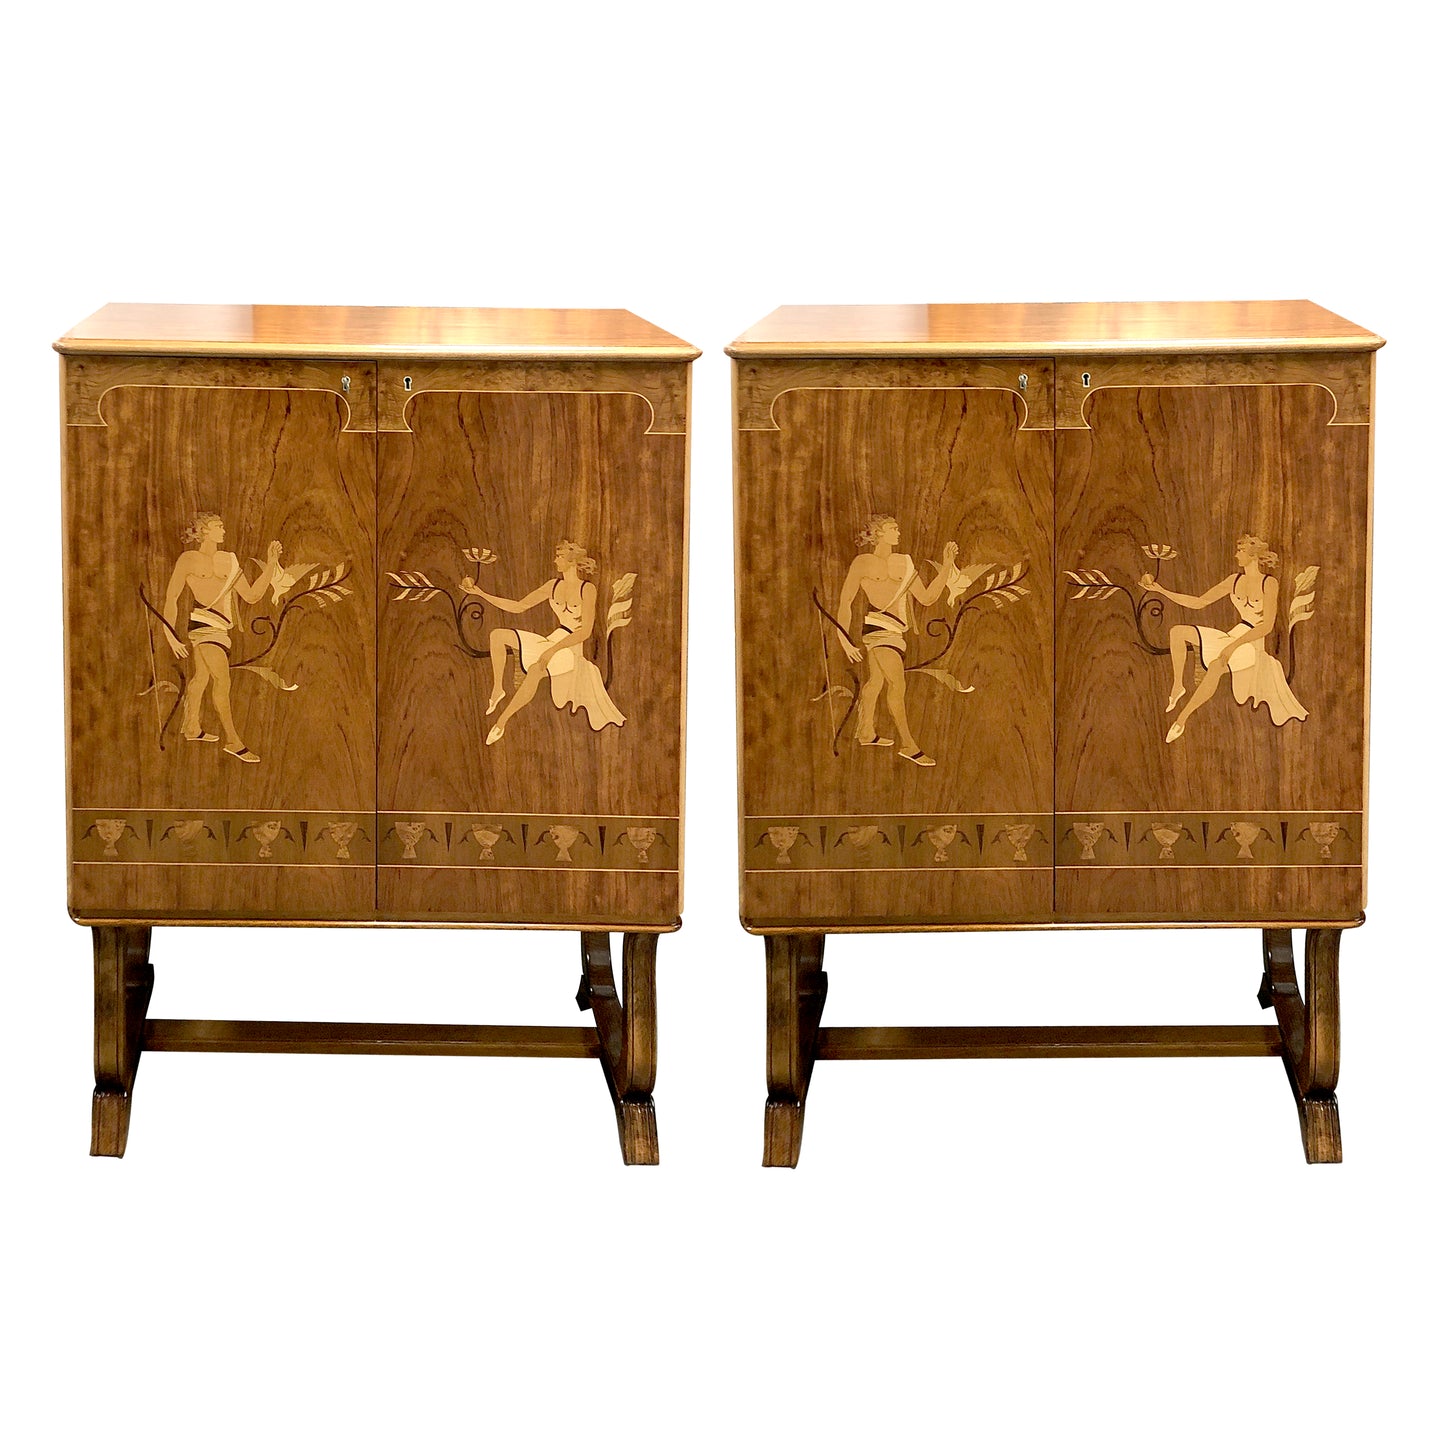 1930s/40s Pair Of Swedish Mahogany Cabinets With Inlaid Marquetry